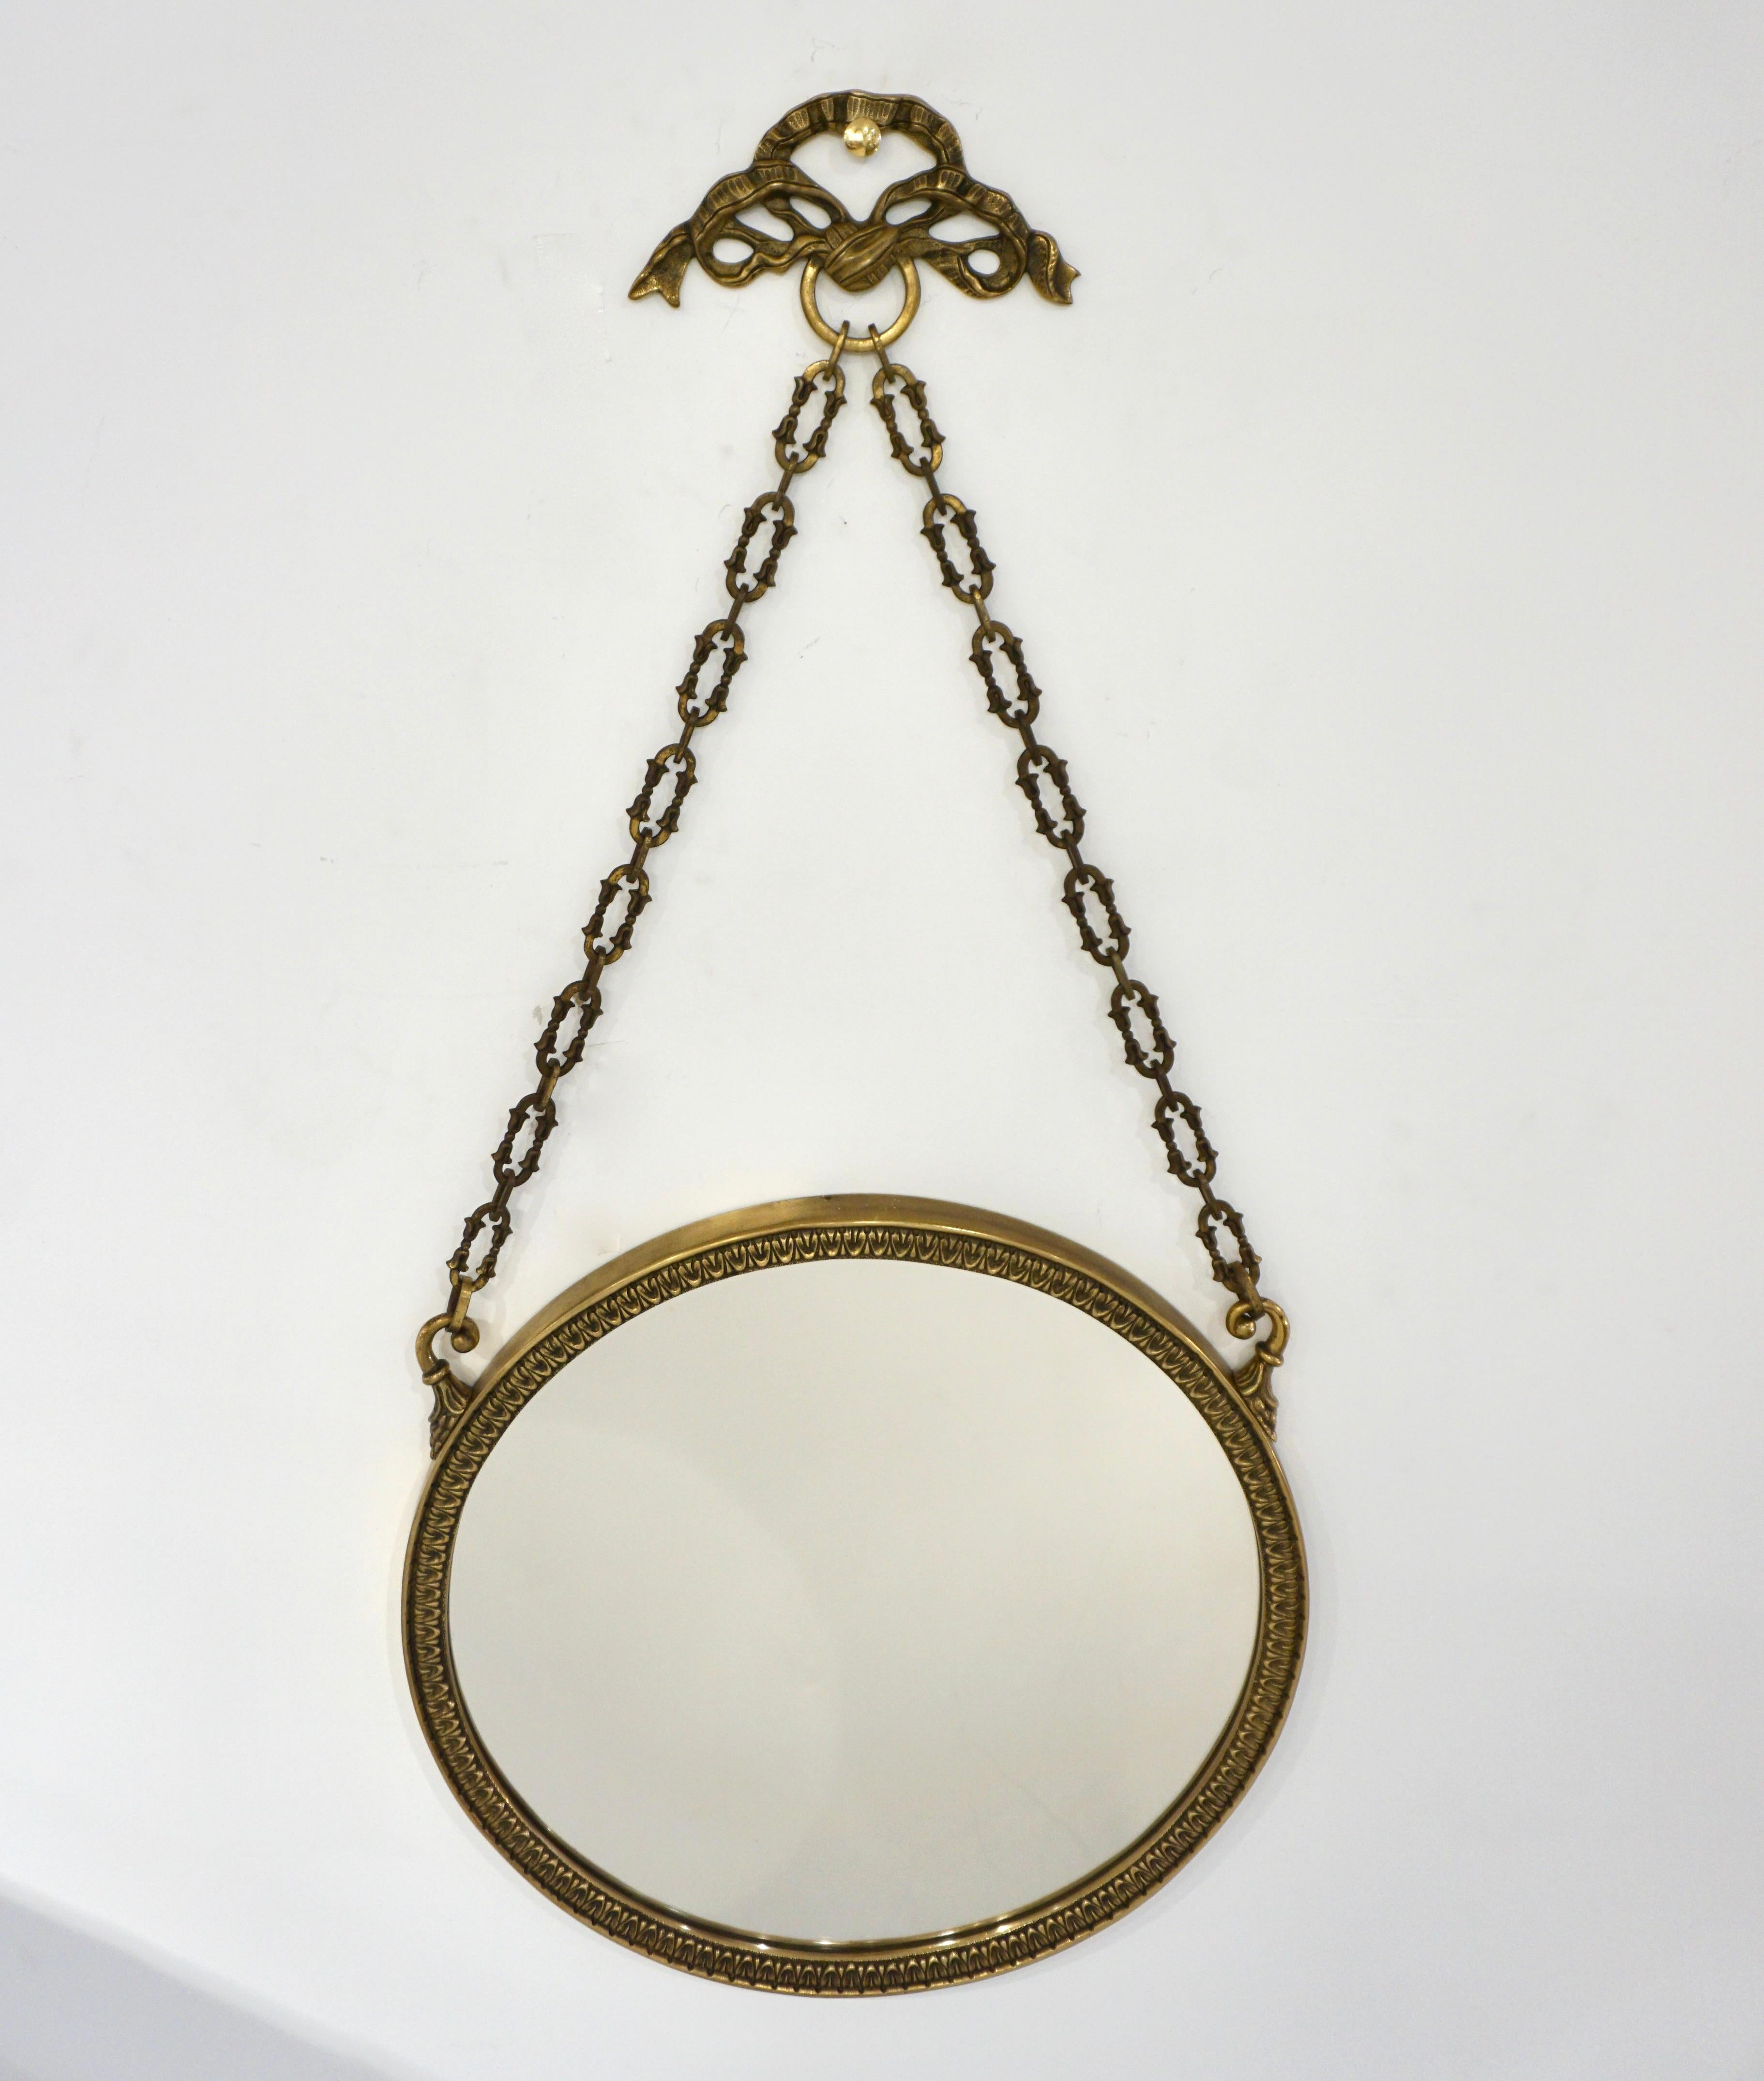 1950s Vintage Italian Chain Hanging & Chased Bronze Round Mirror with Knot 1